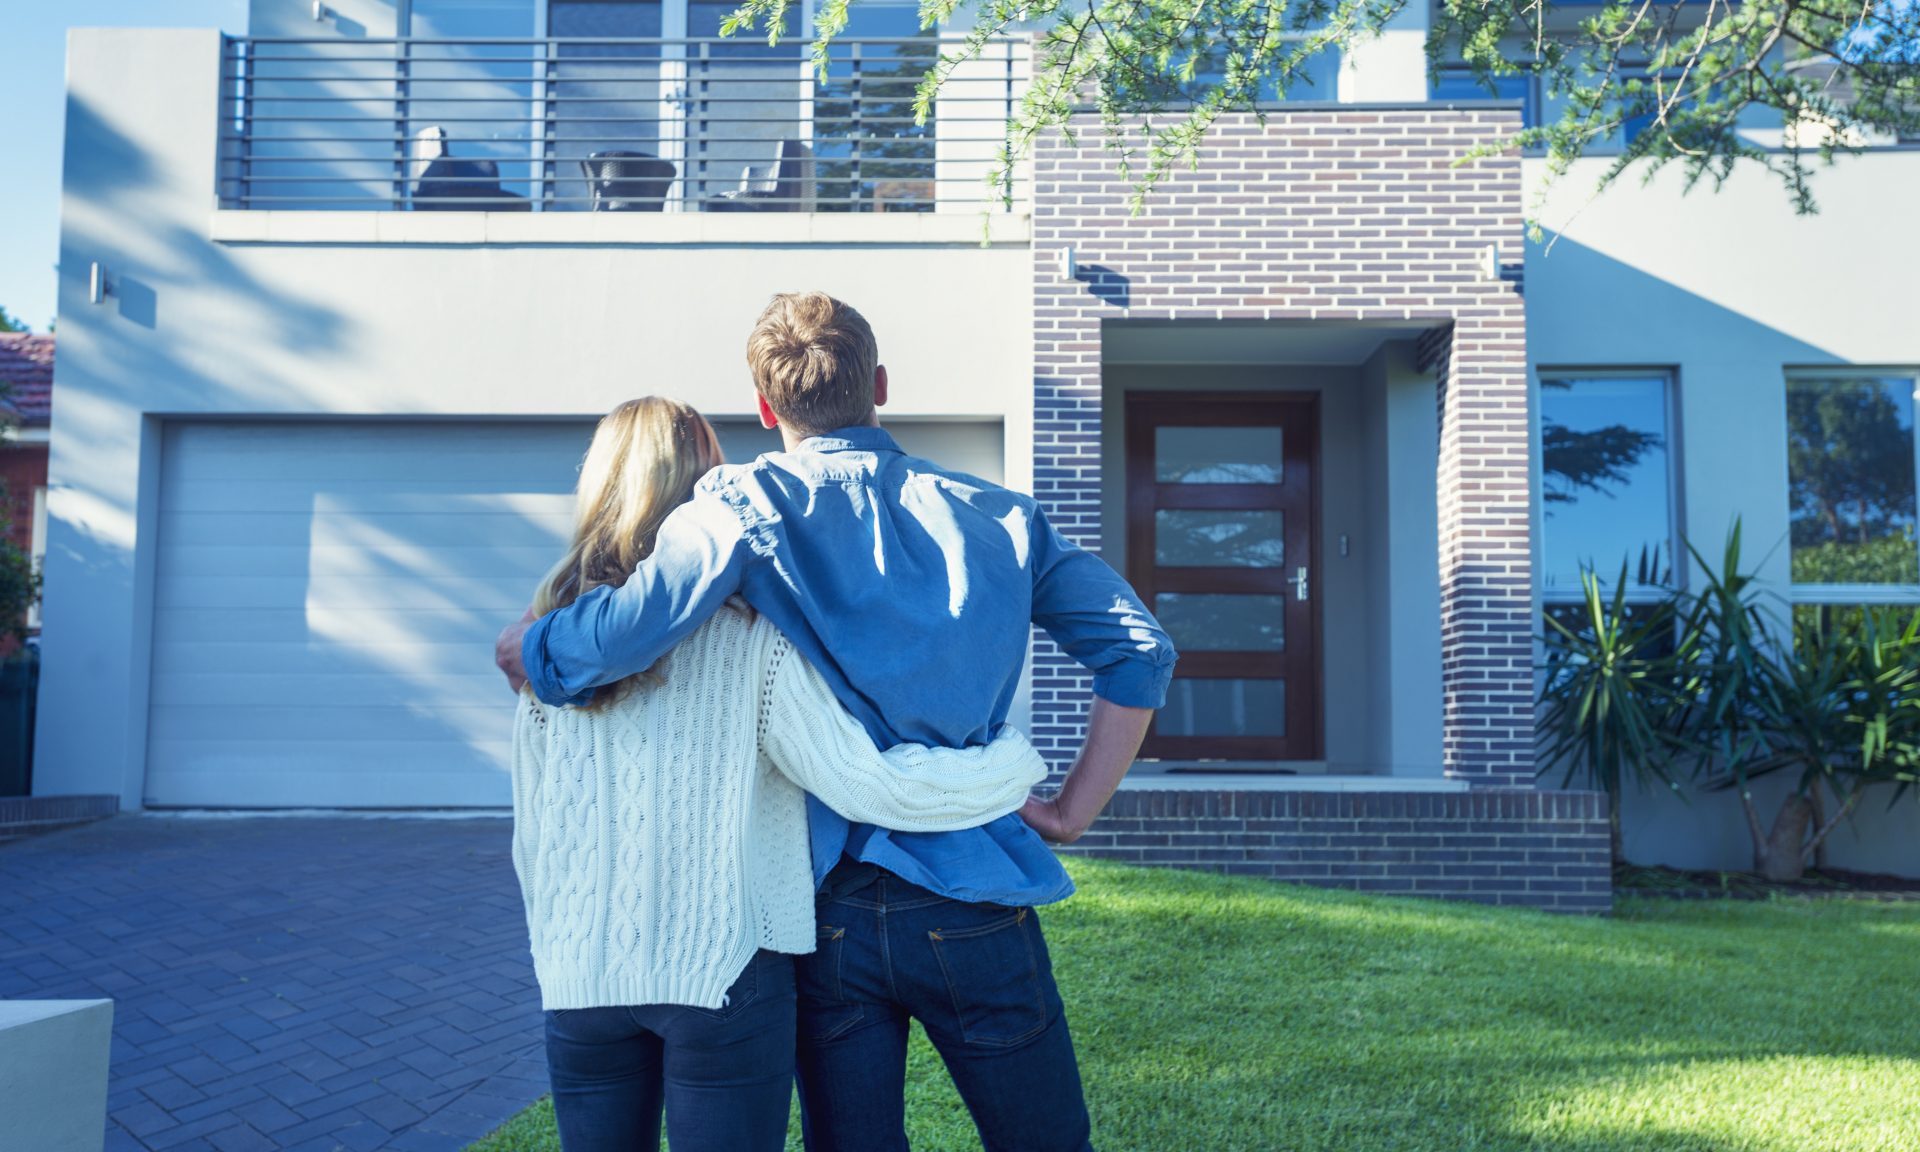 Do Your Own 'Comps' to Gauge Home Value - NerdWallet